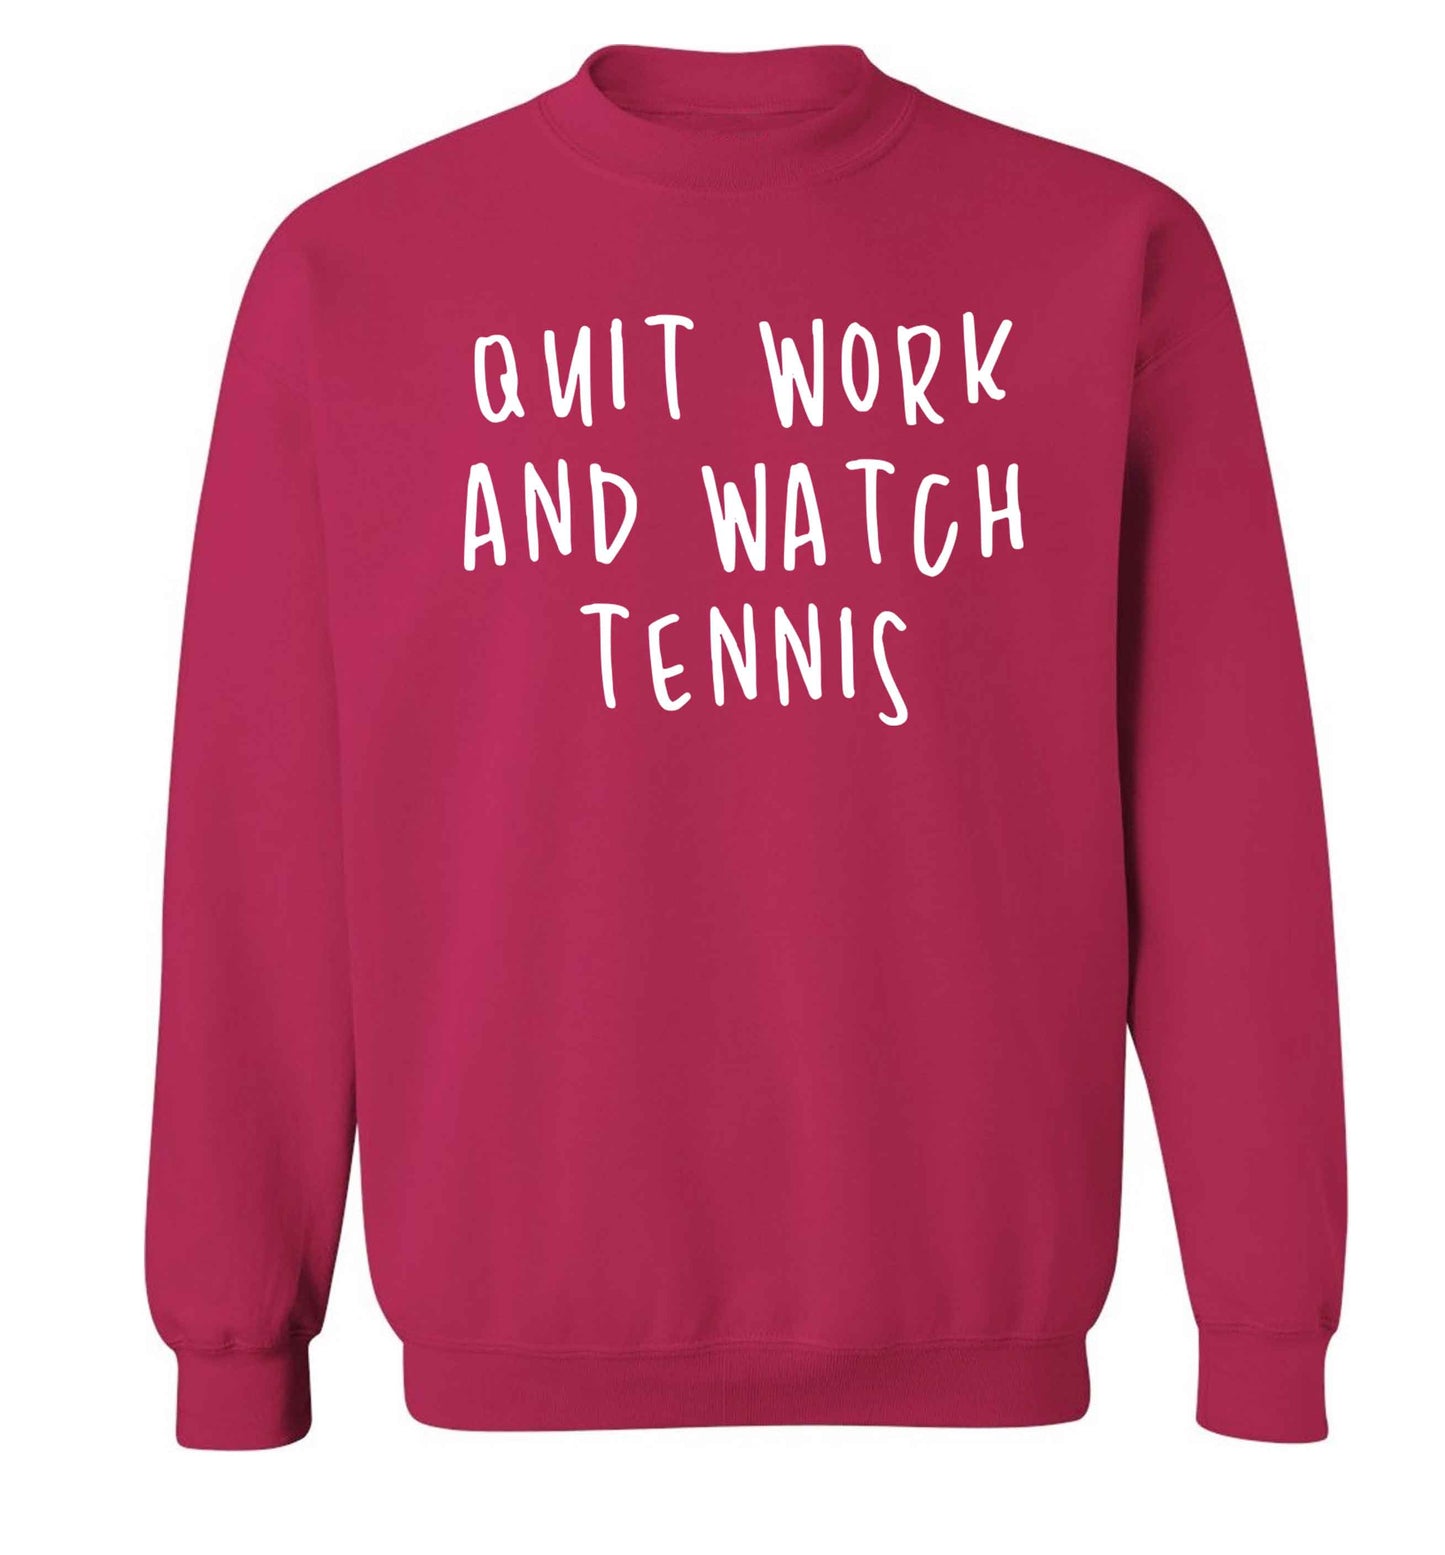 Quit work and watch tennis Adult's unisex pink Sweater 2XL